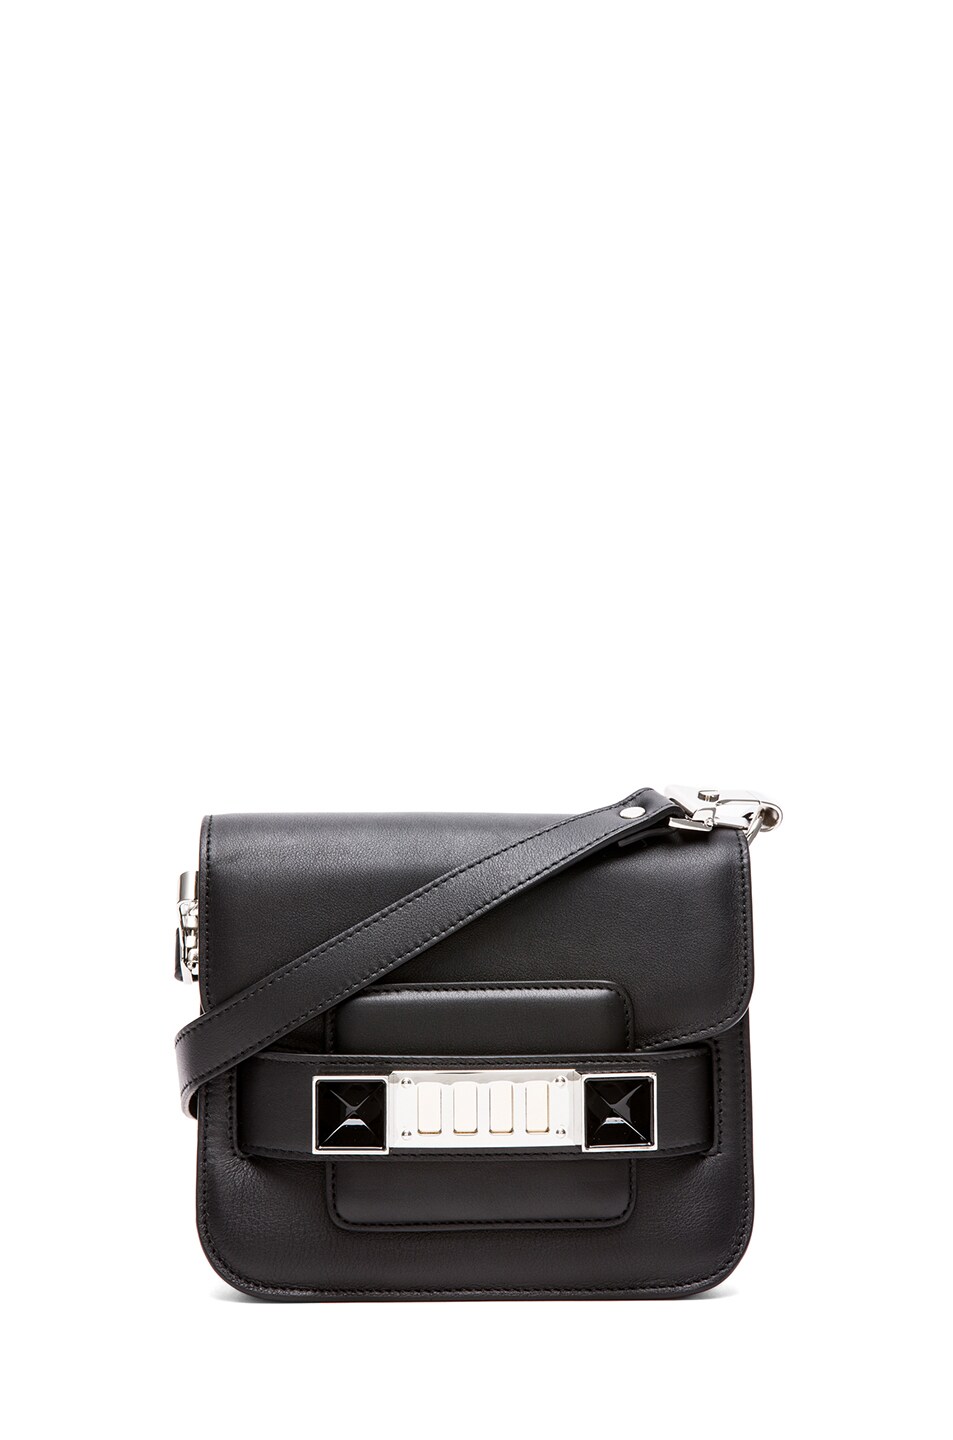 Image 1 of Proenza Schouler Tiny PS11 Smooth Leather Shoulder Bag in Black